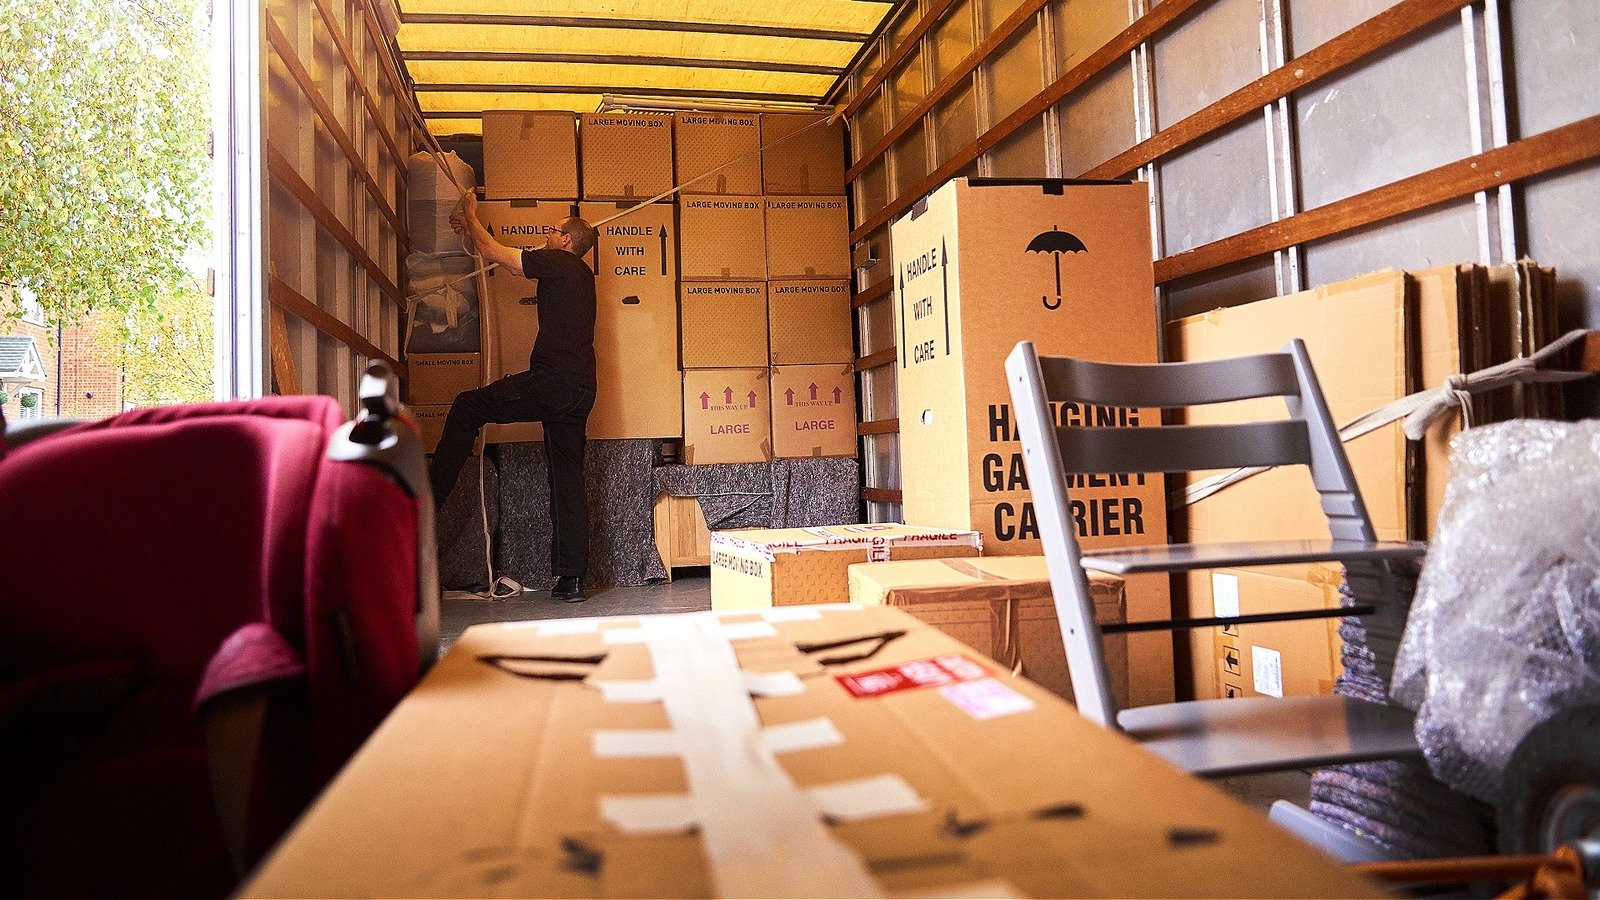 How Much Money Should You Tip Movers?